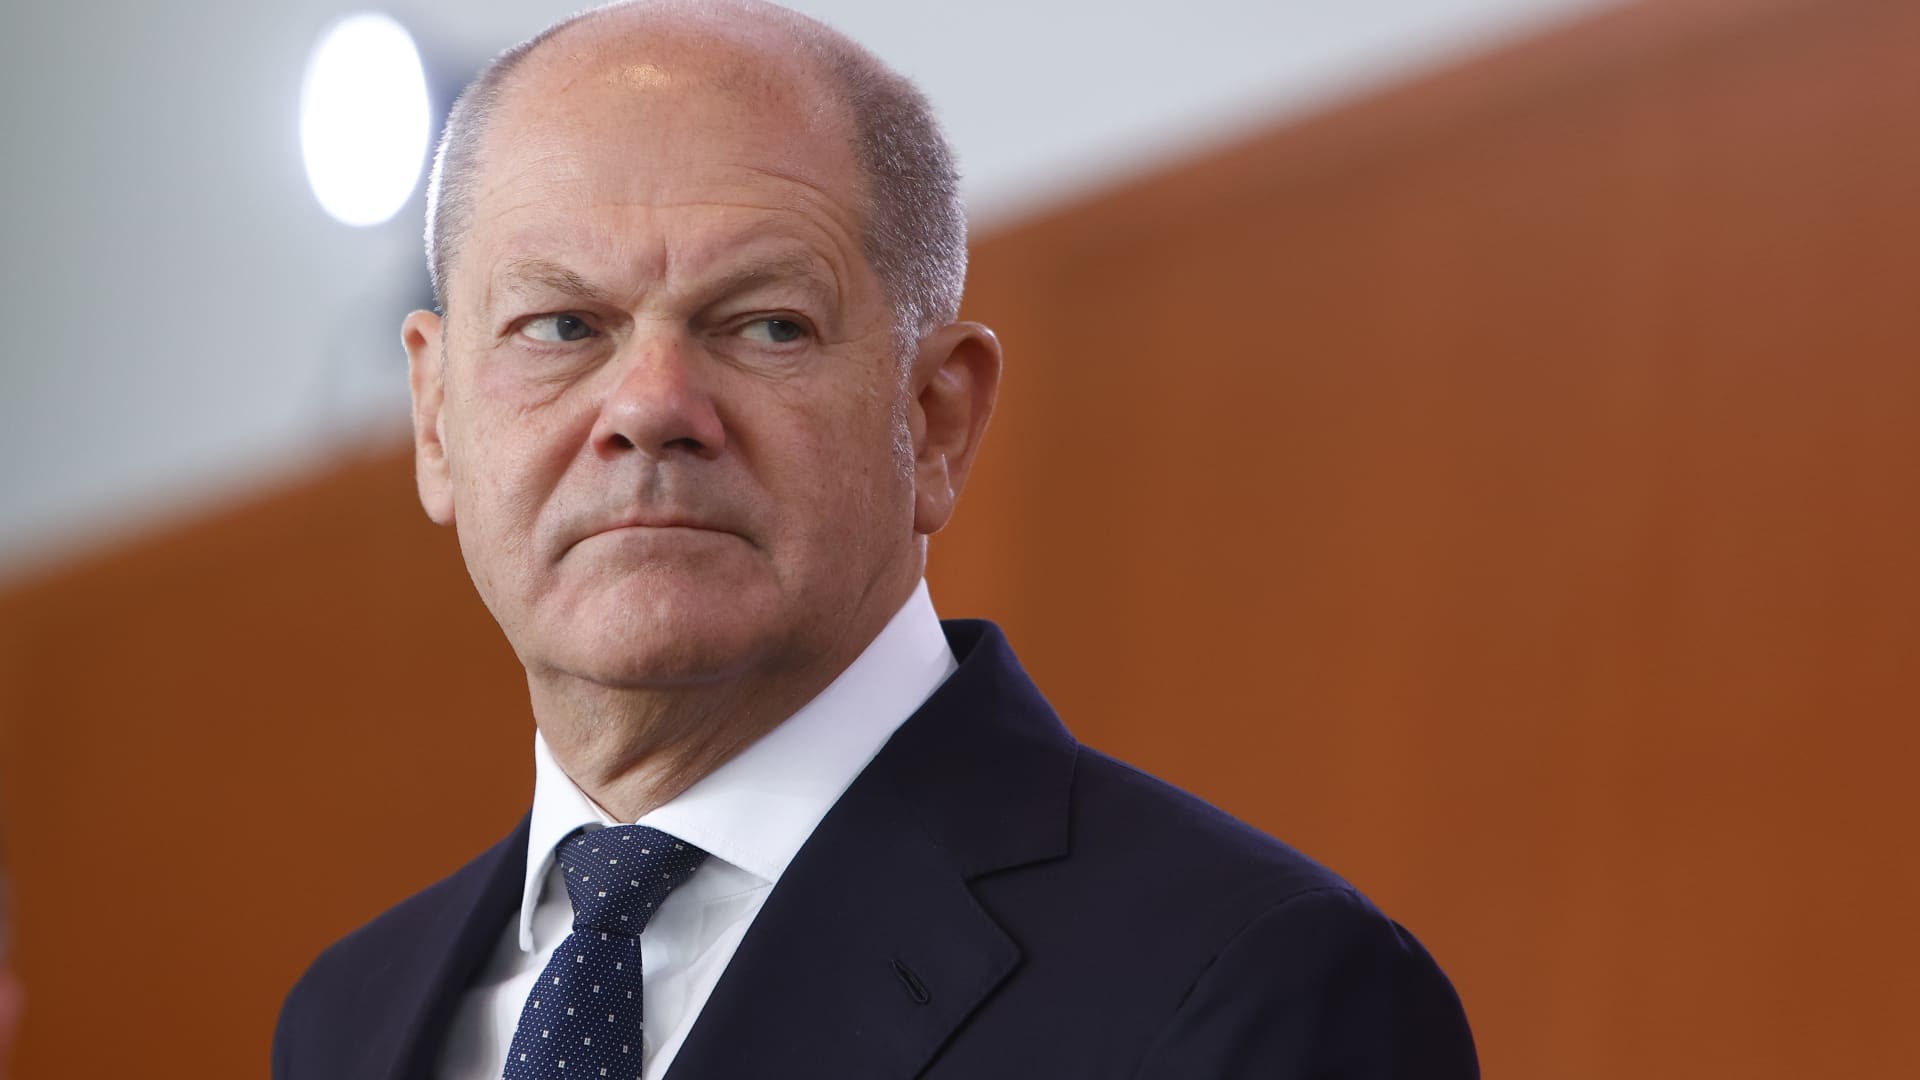 Germany's Scholz commits to spending 2% on defense 'in the 2020s, in the 2030s and beyond'